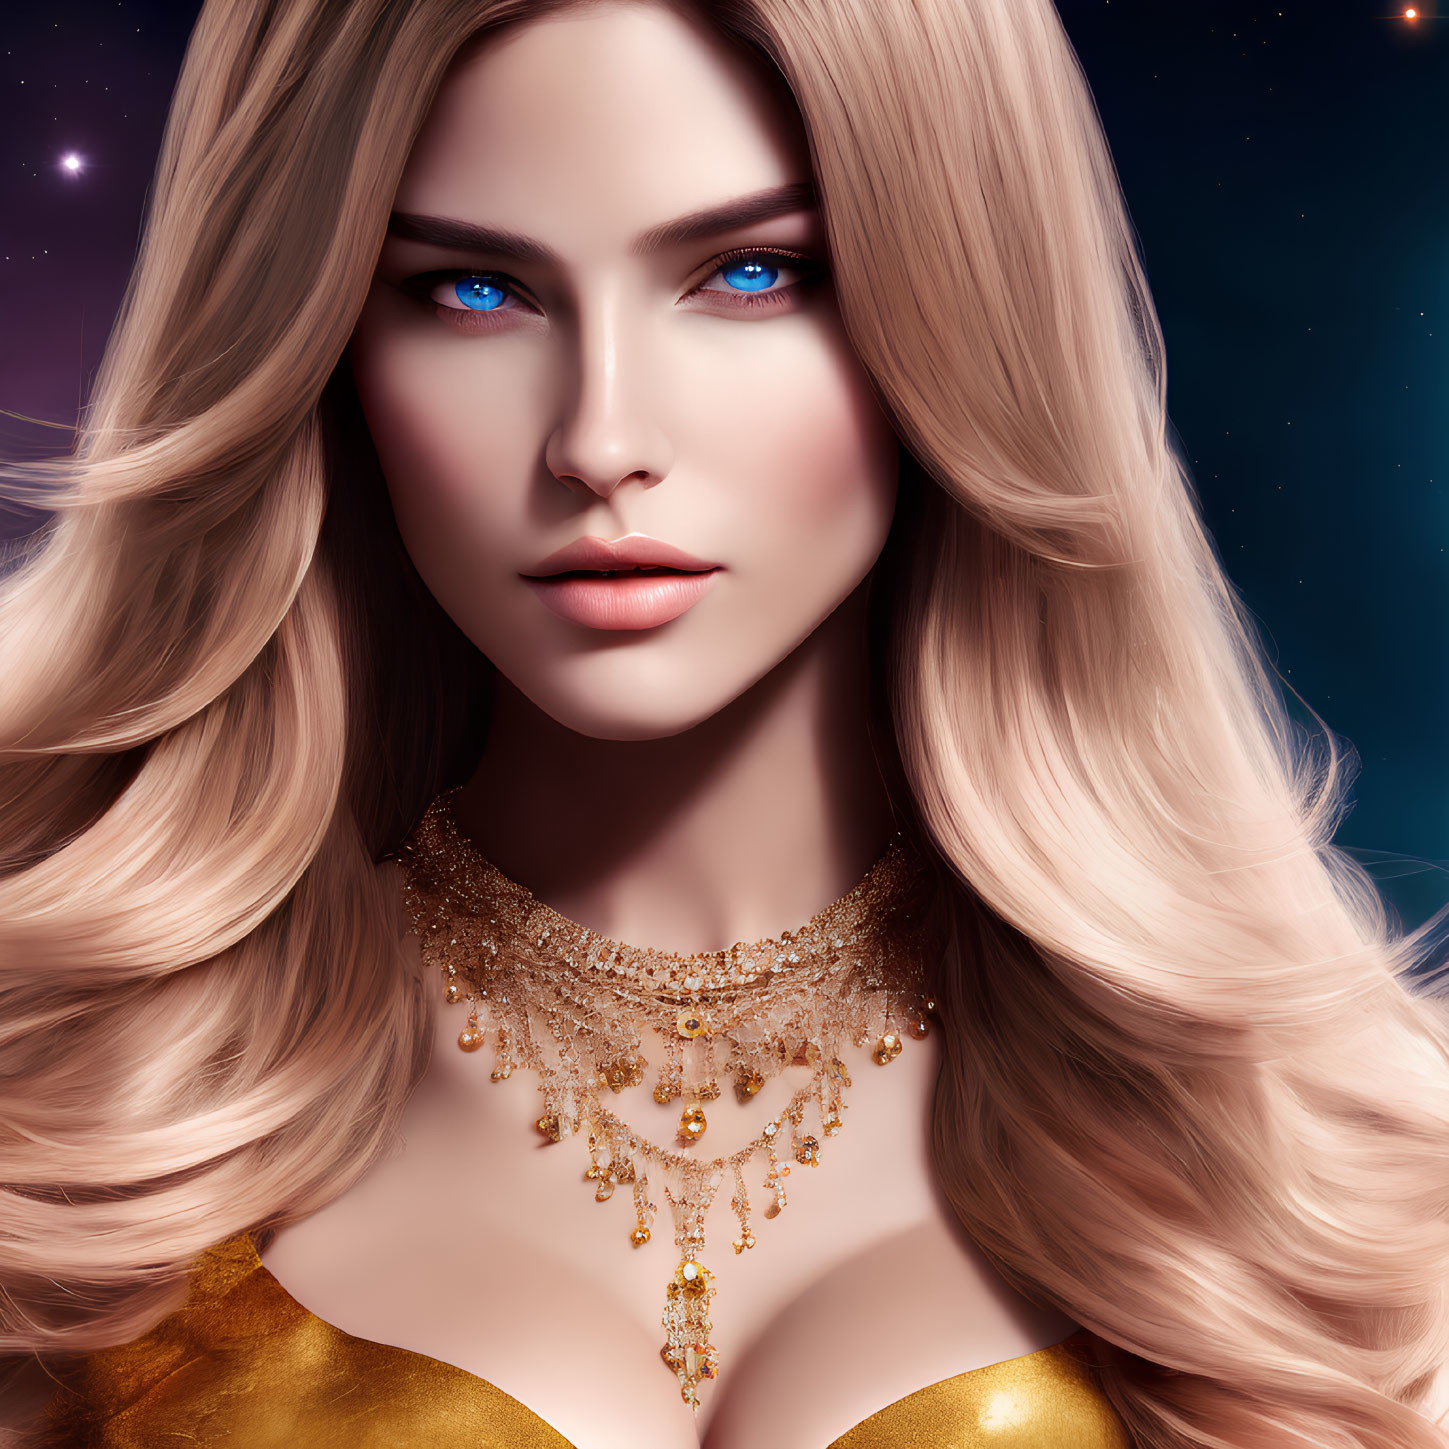 Blonde woman with blue eyes in gold jewelry on starry background